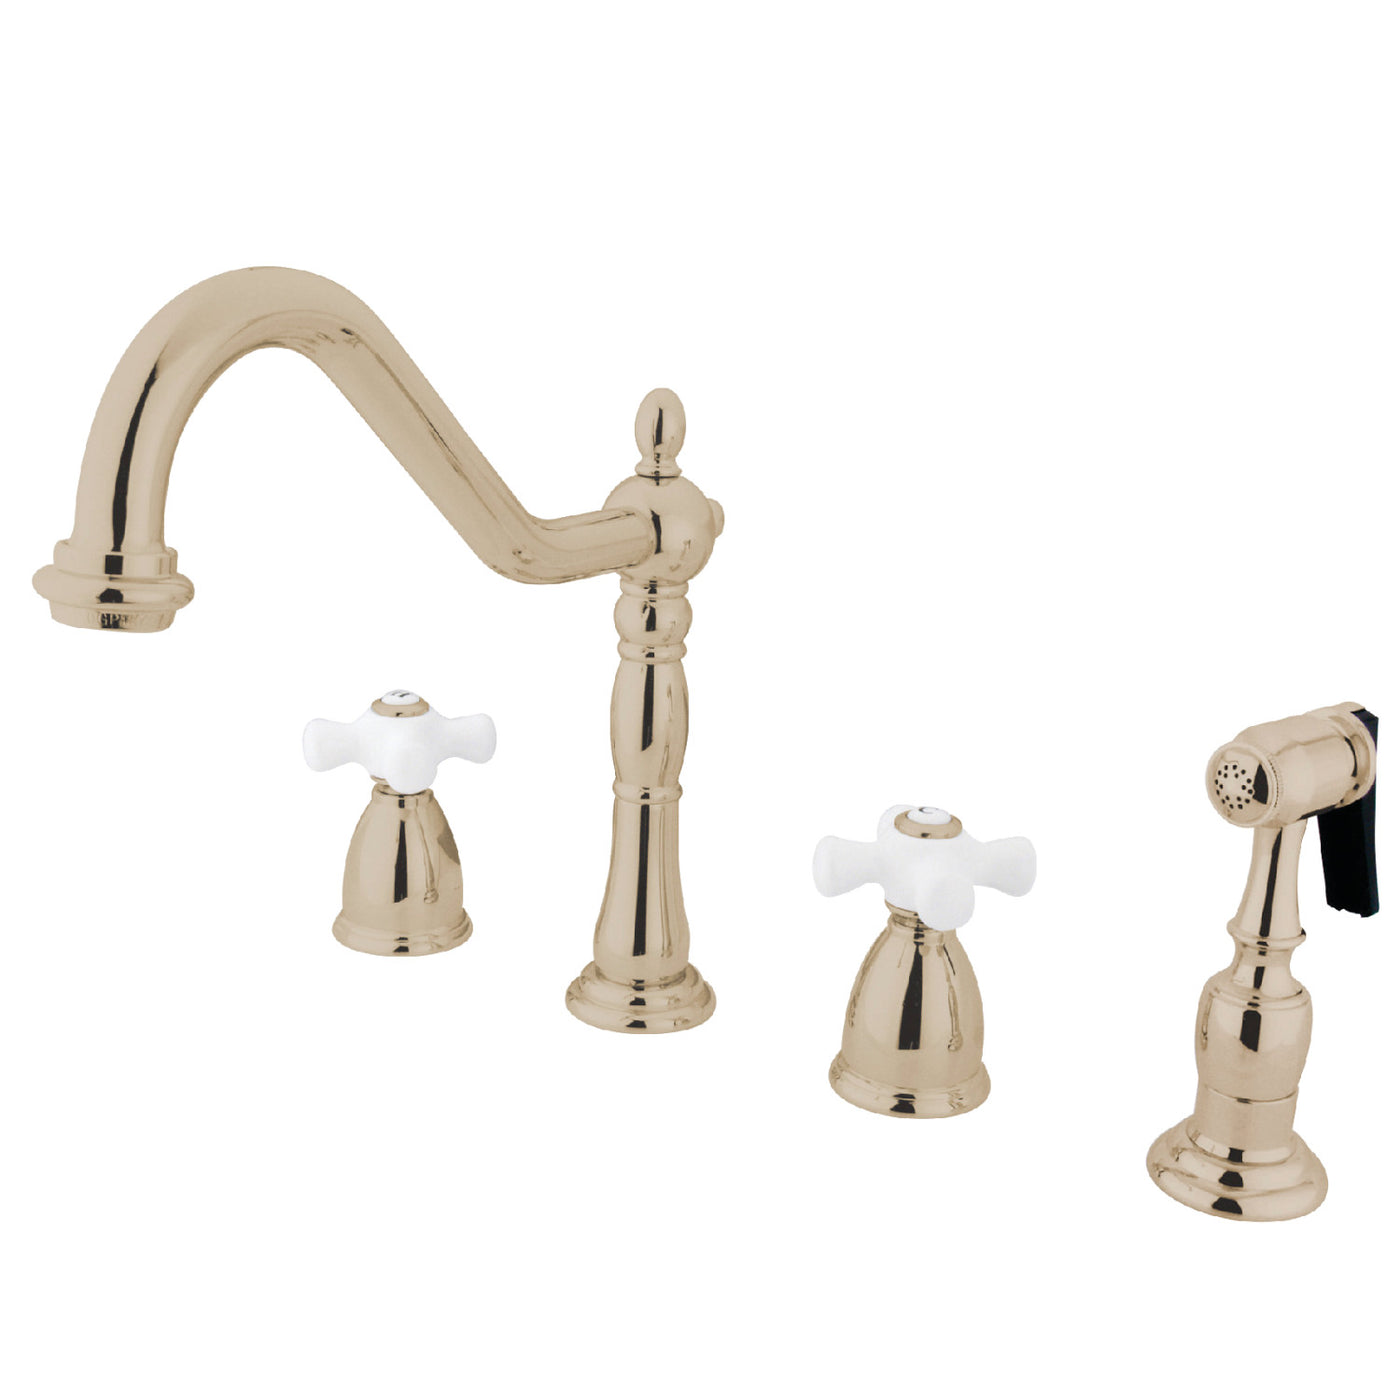 Elements of Design EB1796PXBS Widespread Kitchen Faucet with Brass Sprayer, Polished Nickel